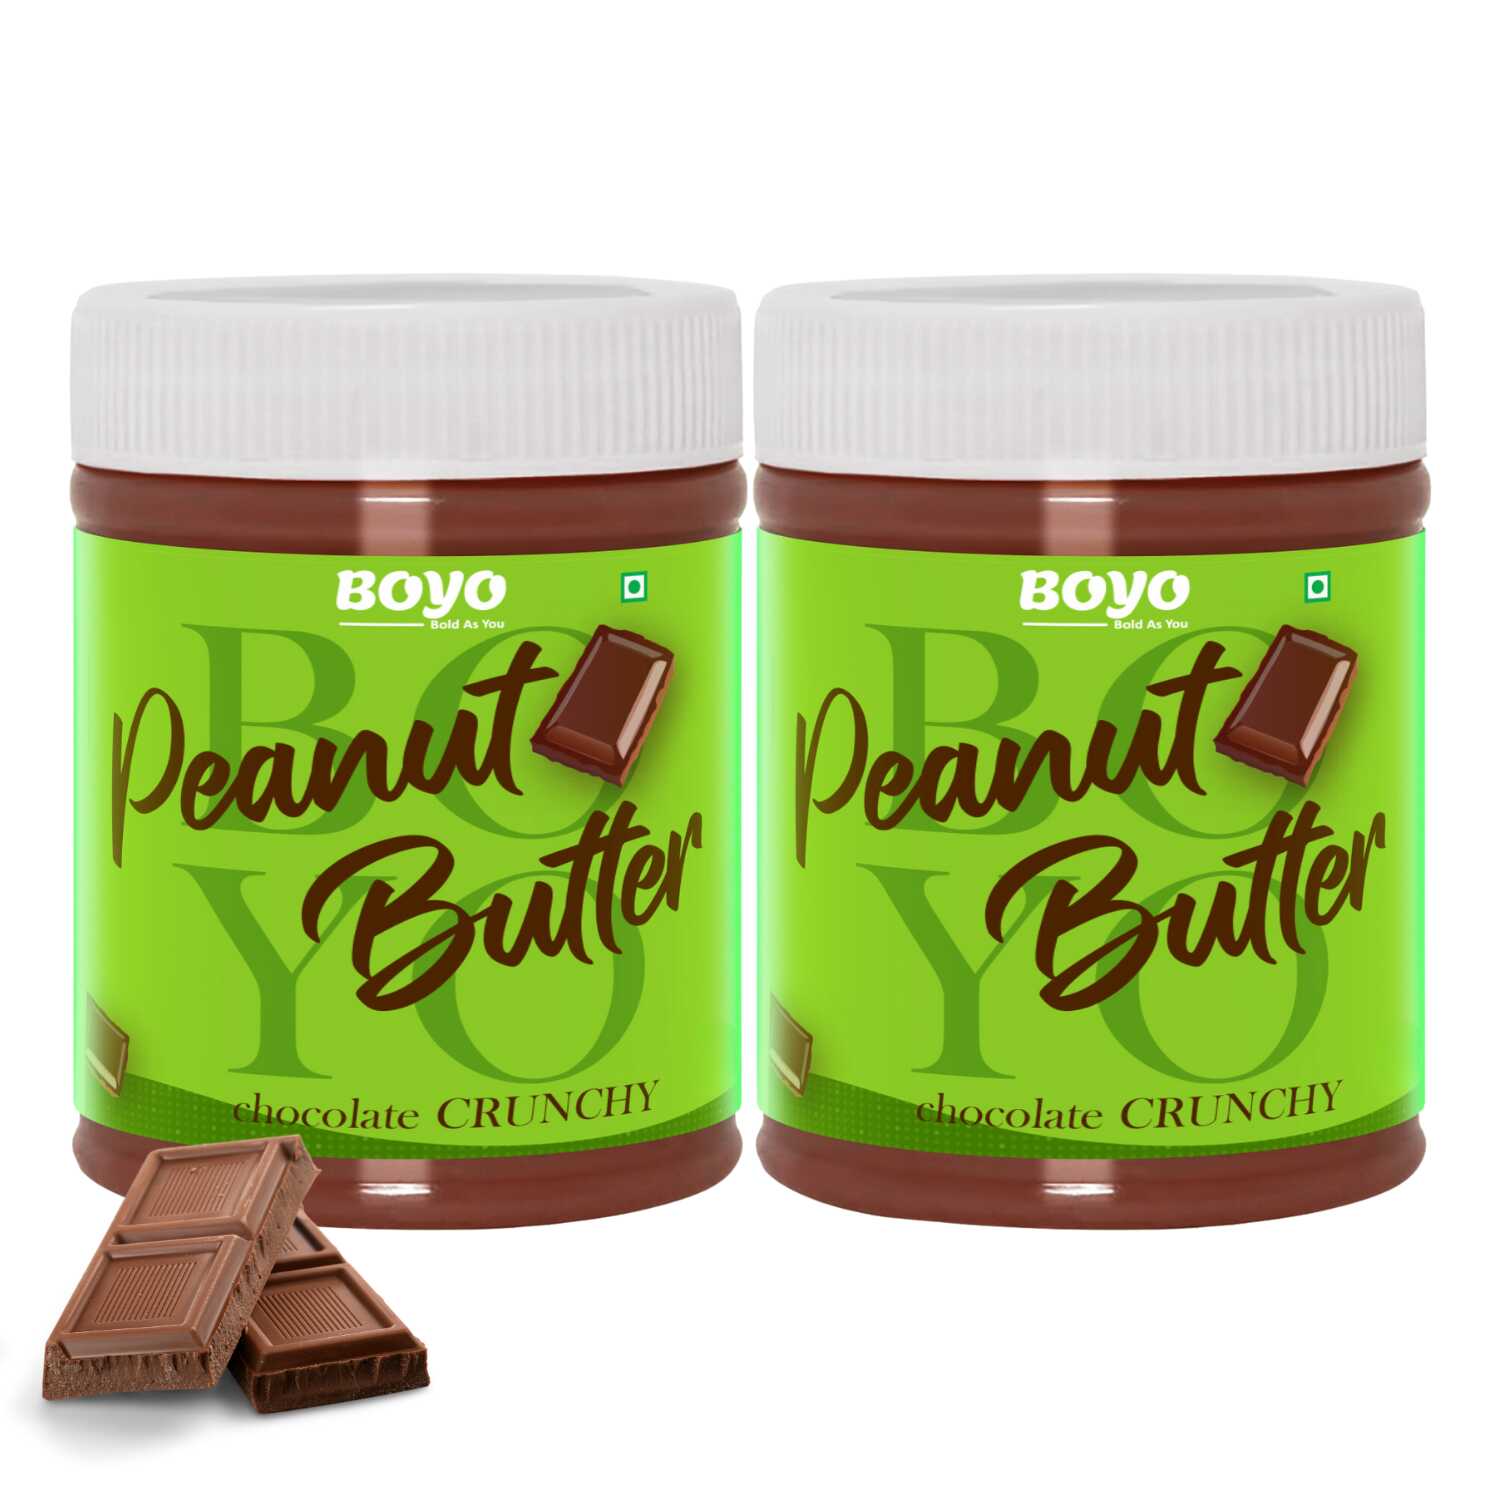 Peanut Butter Combo Chocolate Crunchy 340g Each - Pack of 2